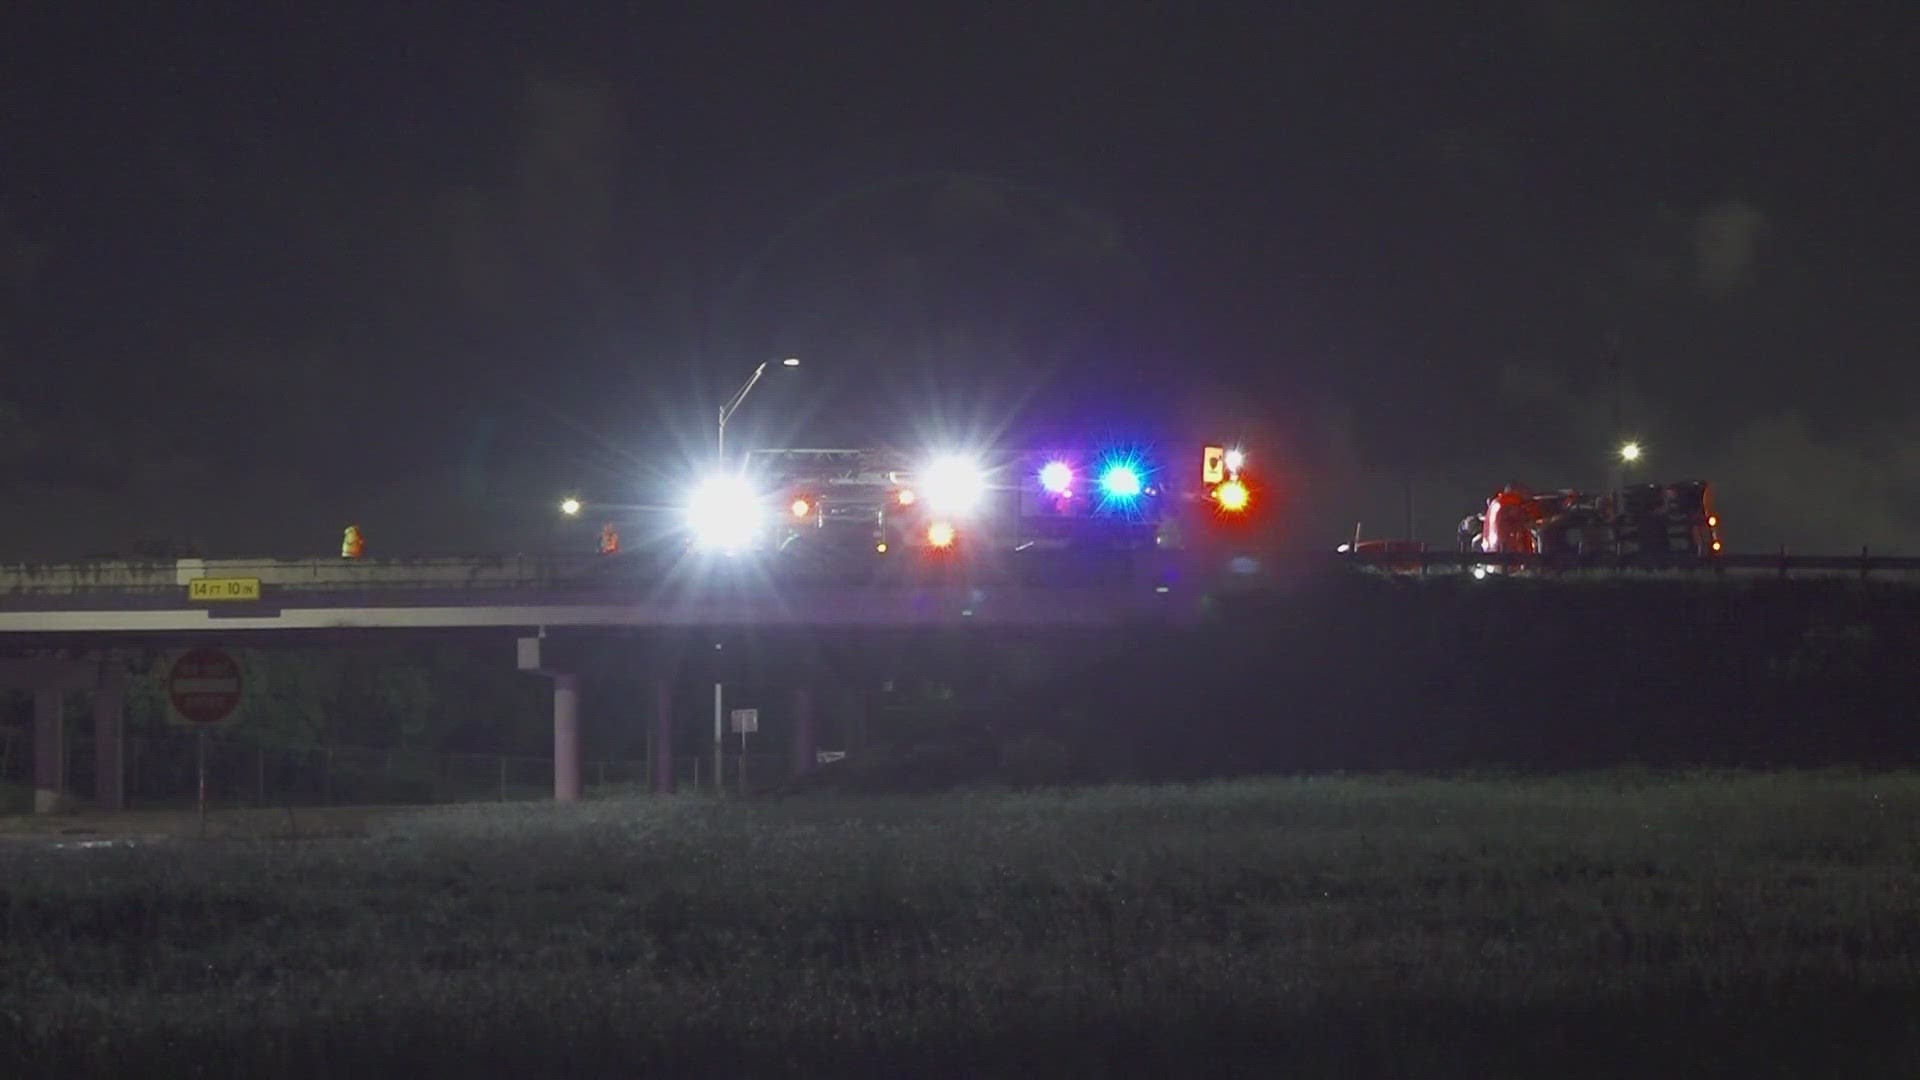 The crash happened around 2:30 a.m. off I-35 and the Poteet Jourdanton freeway near South Park Mall.